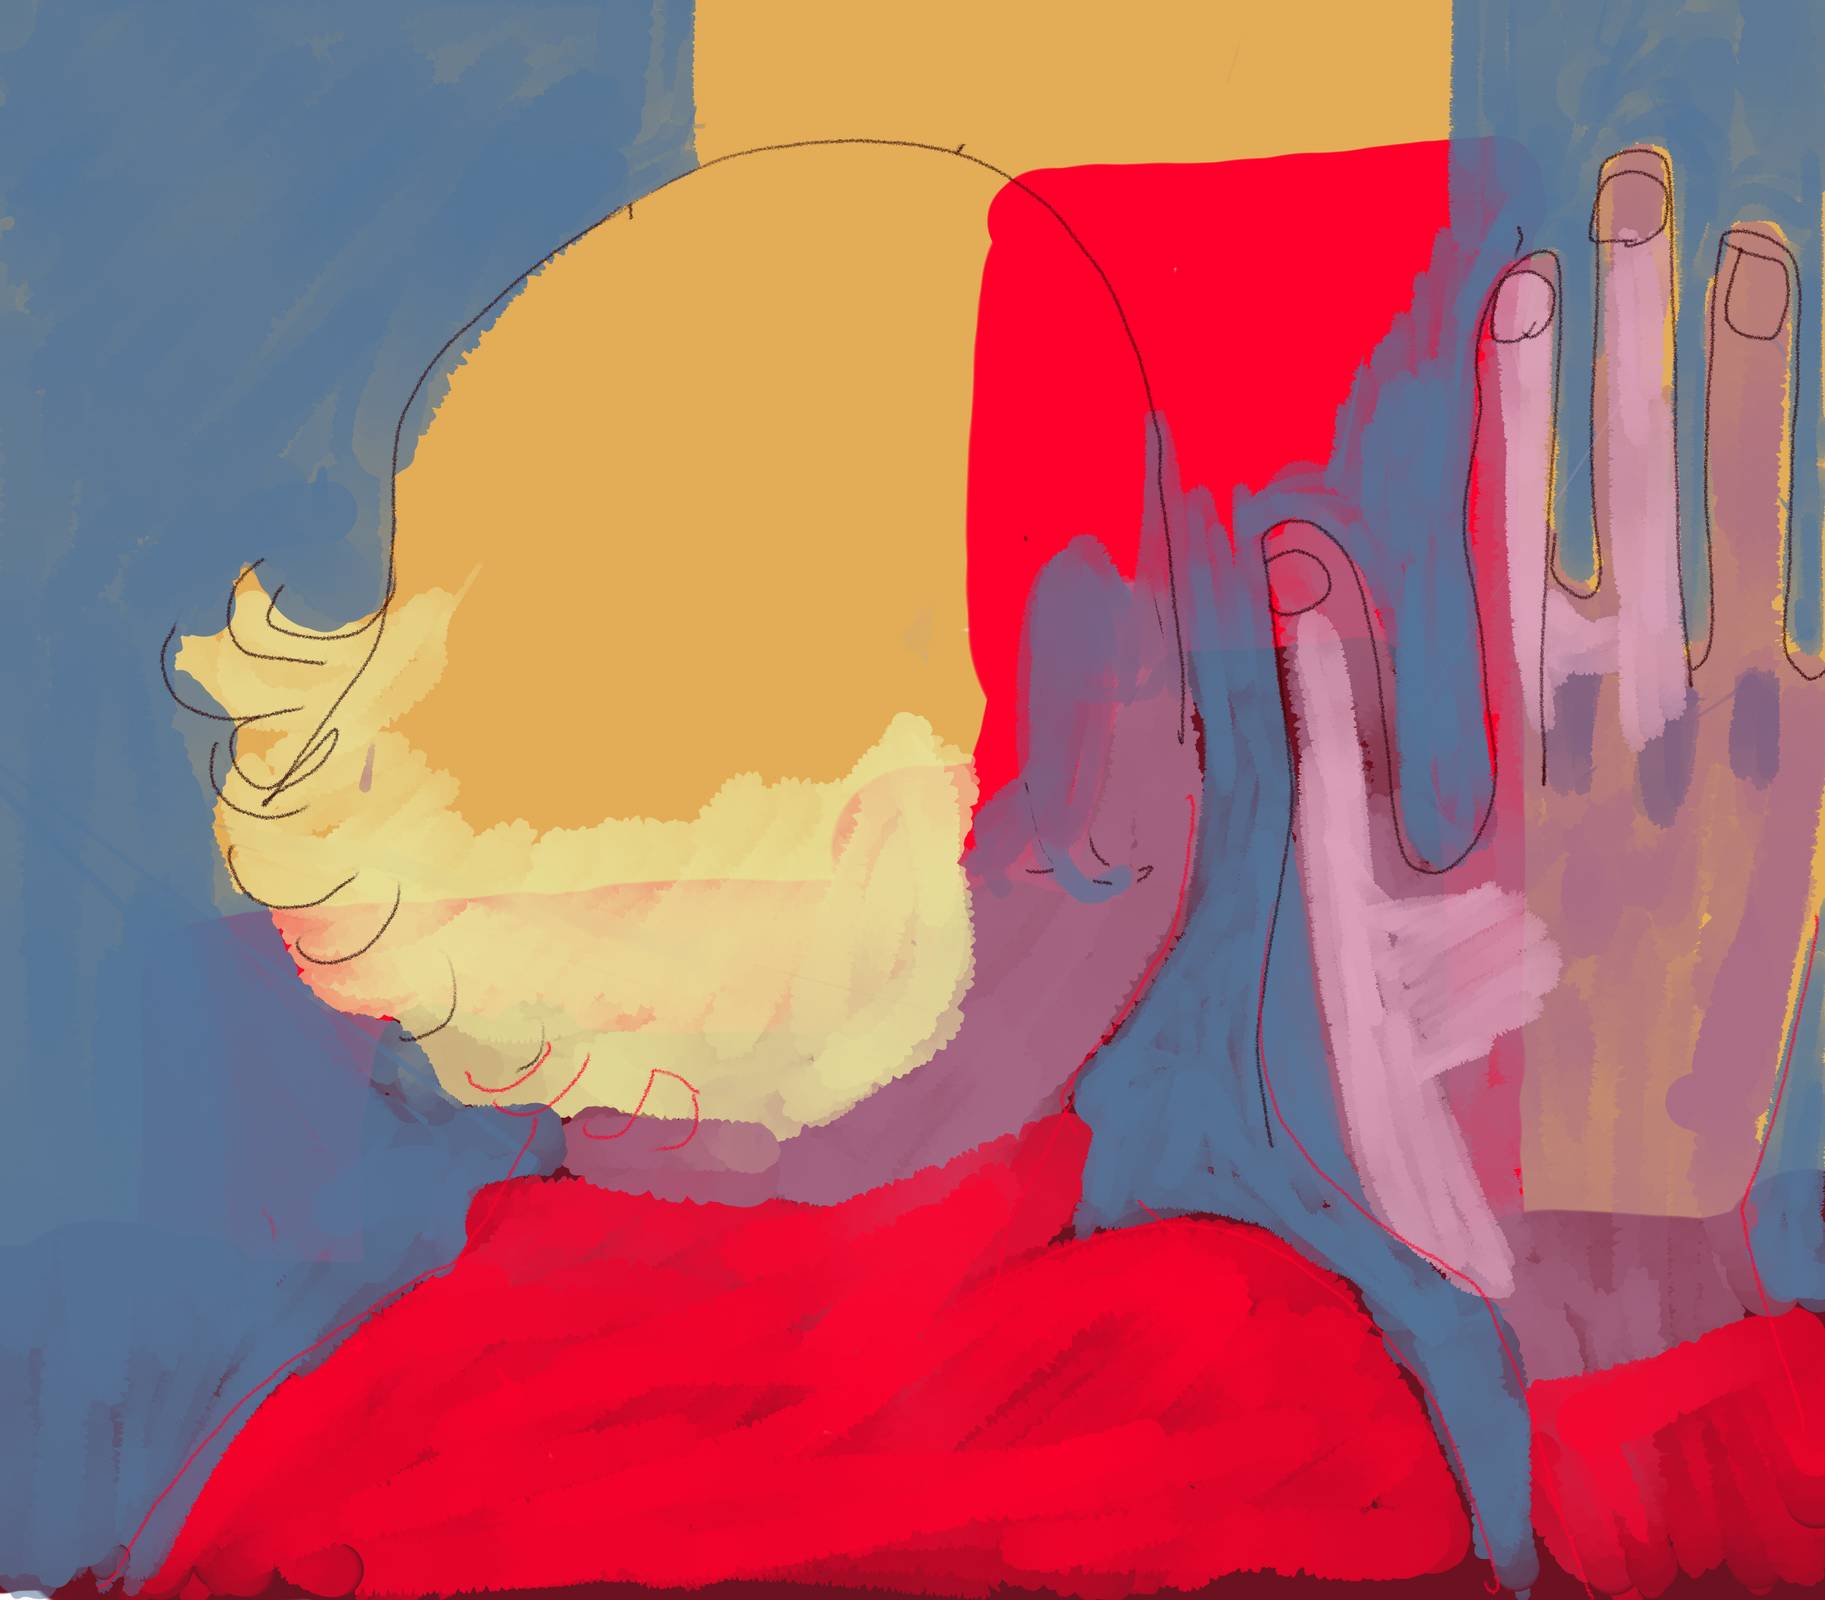 Face turned away holding up a huge hand. Primary colors dominantly.